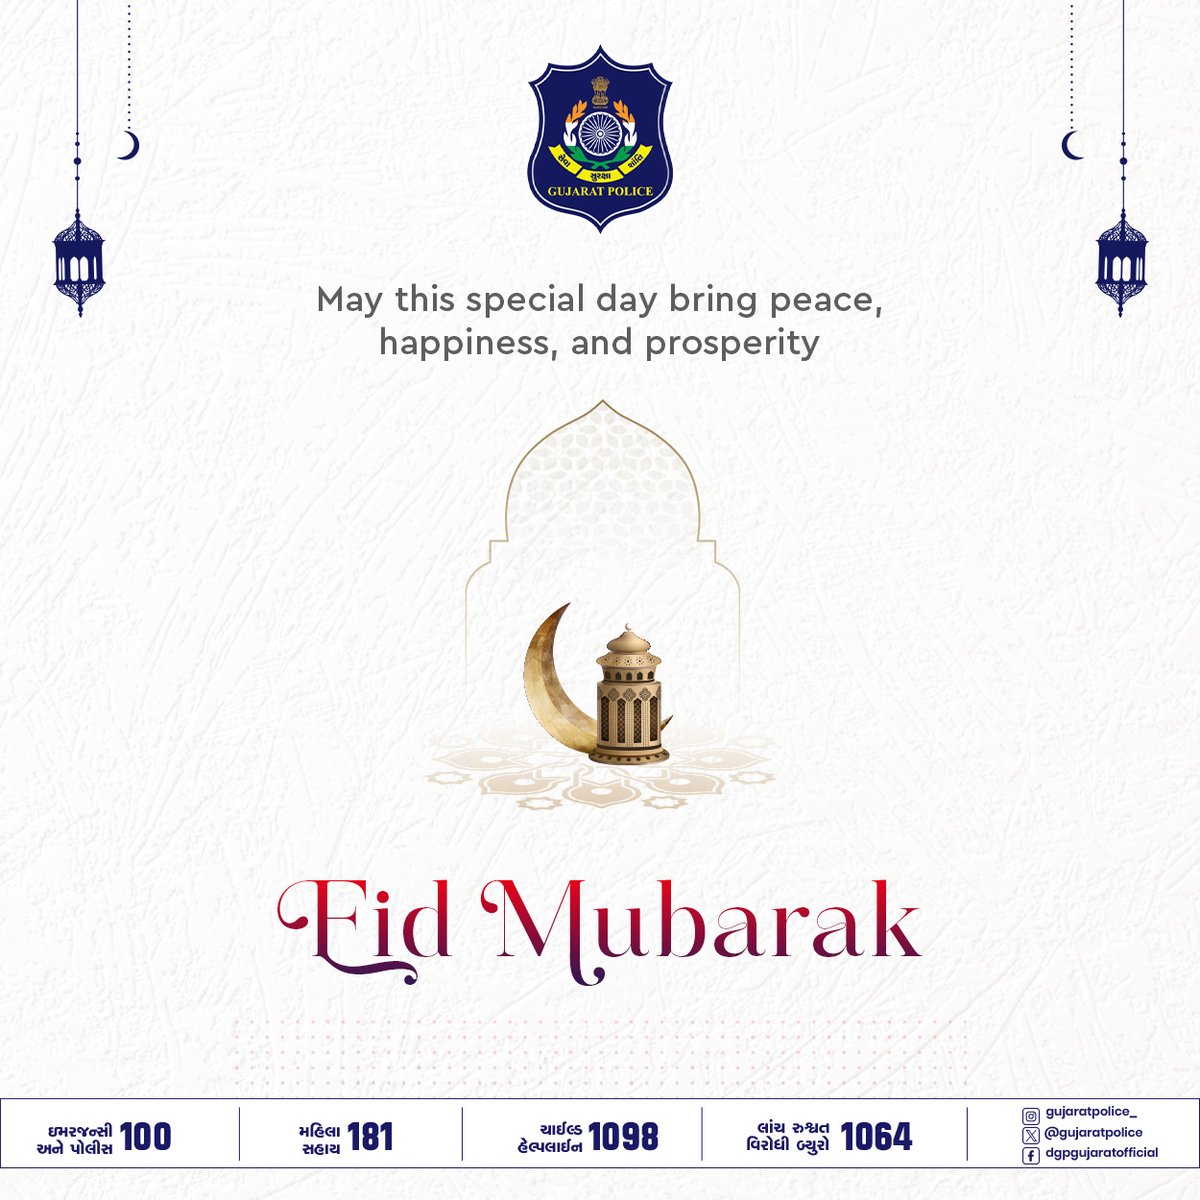 Wishing a joyous Eid-ul-Fitr. May this occasion be radiant with the spirit of togetherness and peace. #EidMubarak